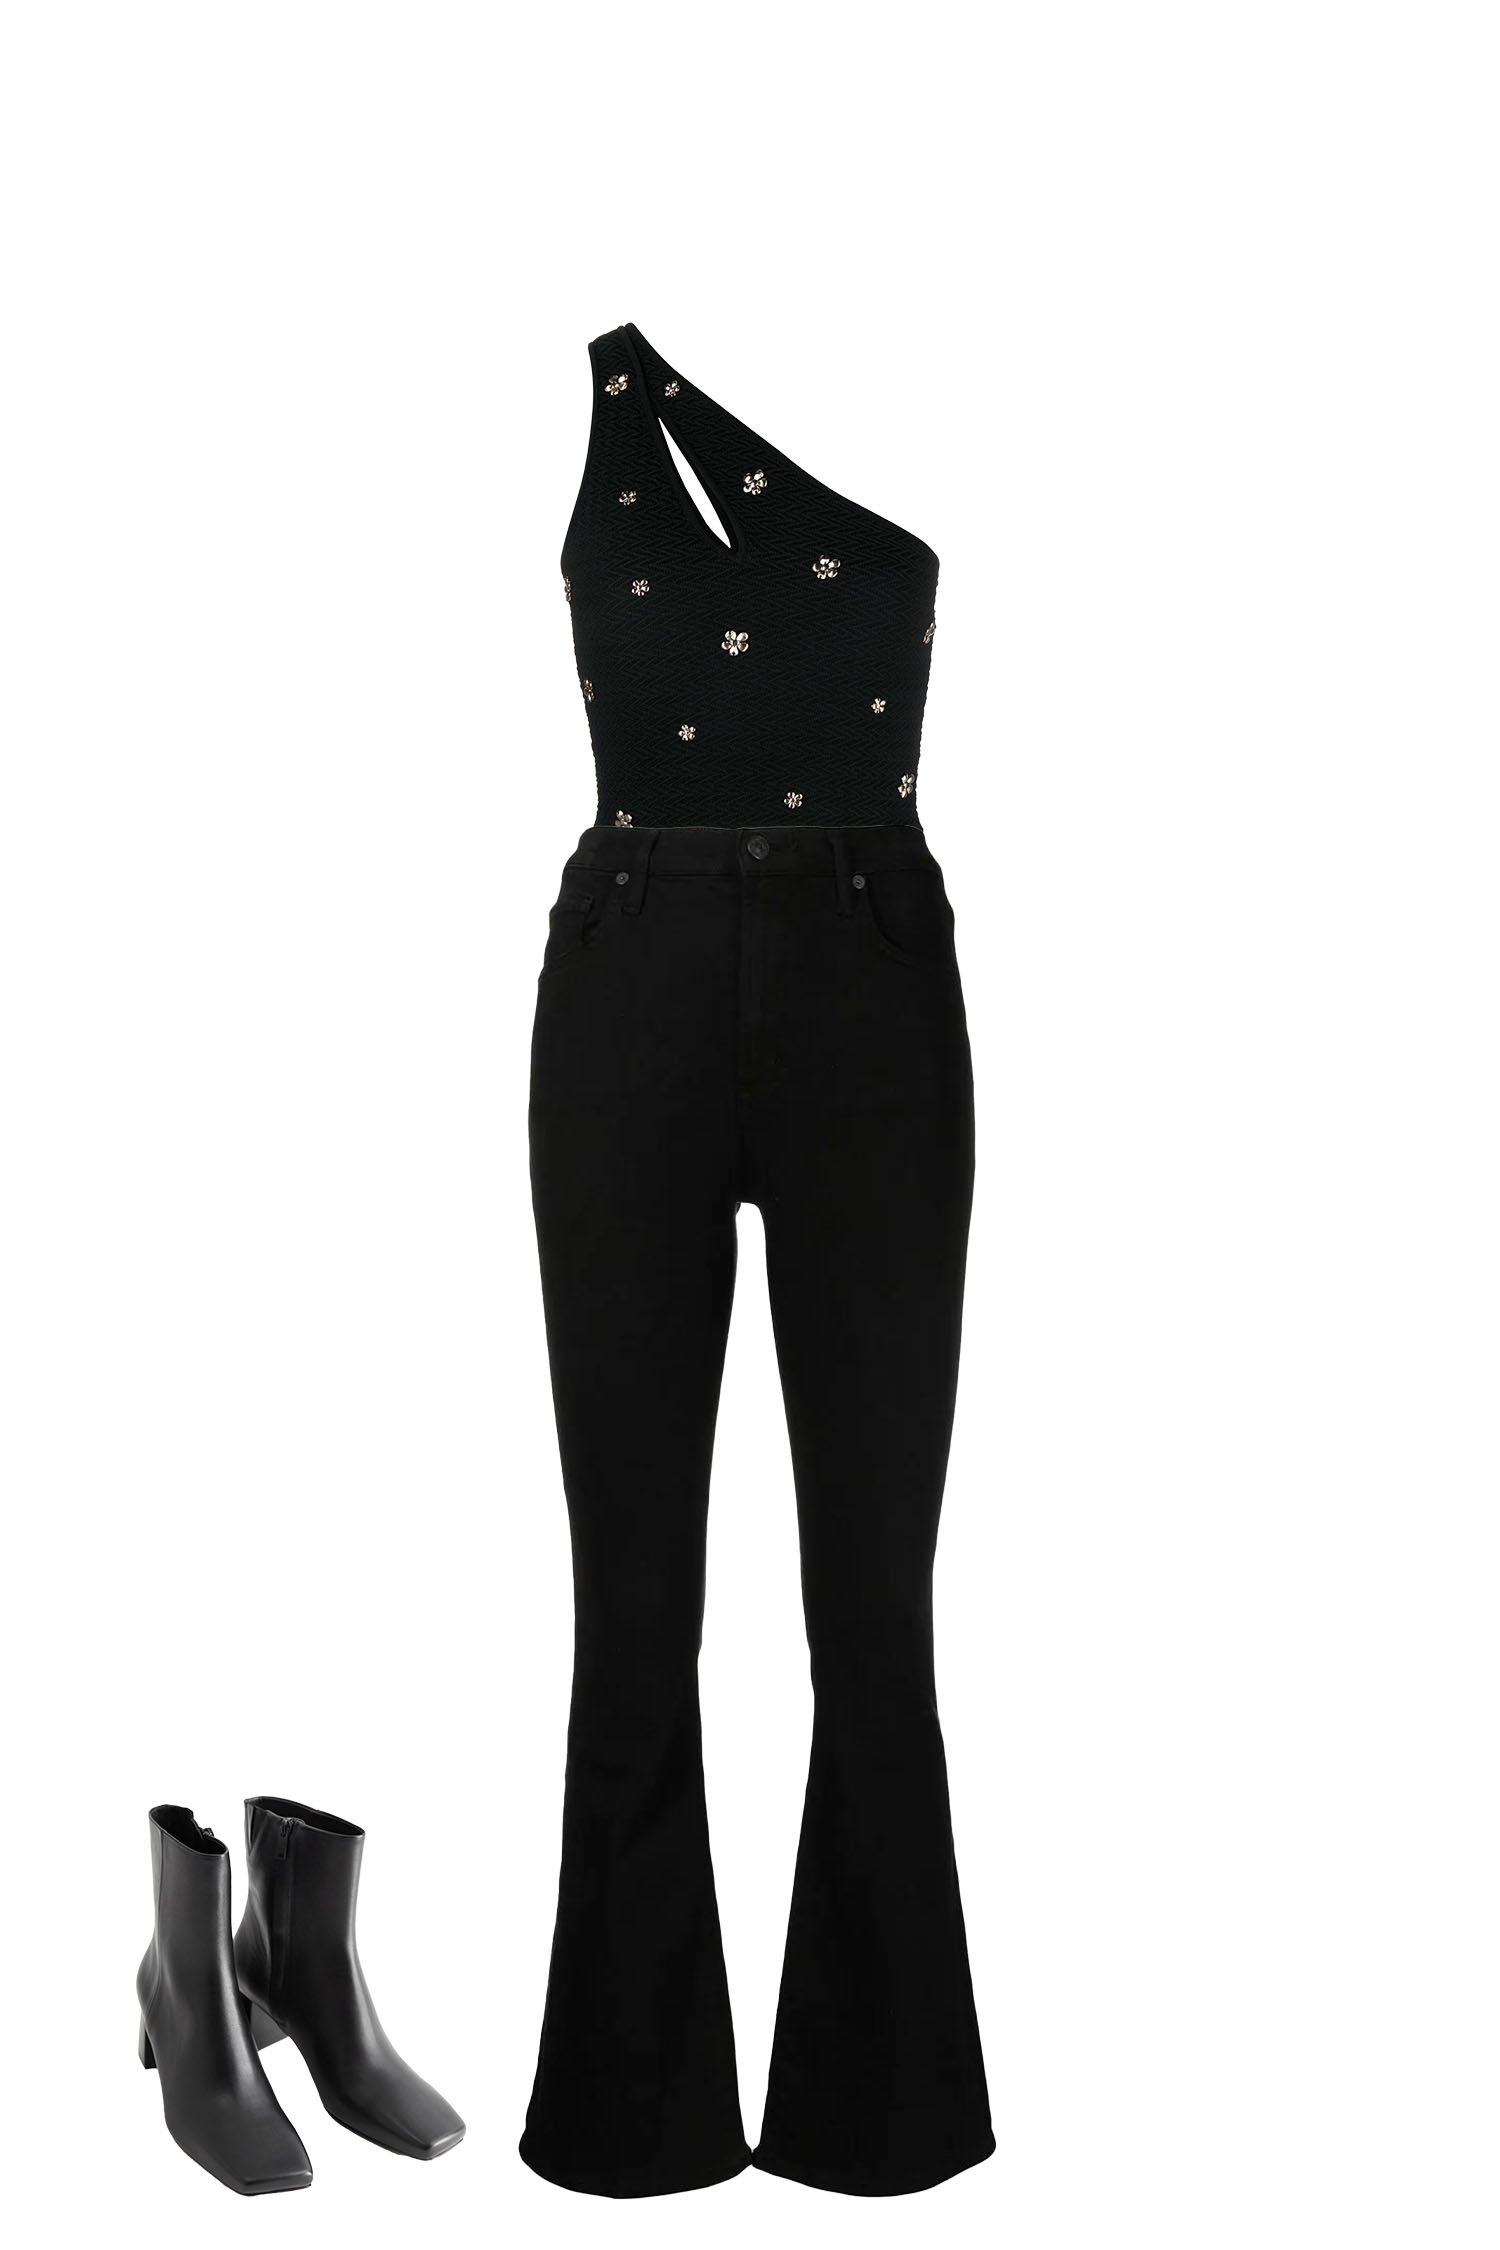 Pair Black Flare Jeans with a One-Shoulder Floral Sequin Top, and Square-Toe Ankle Boots